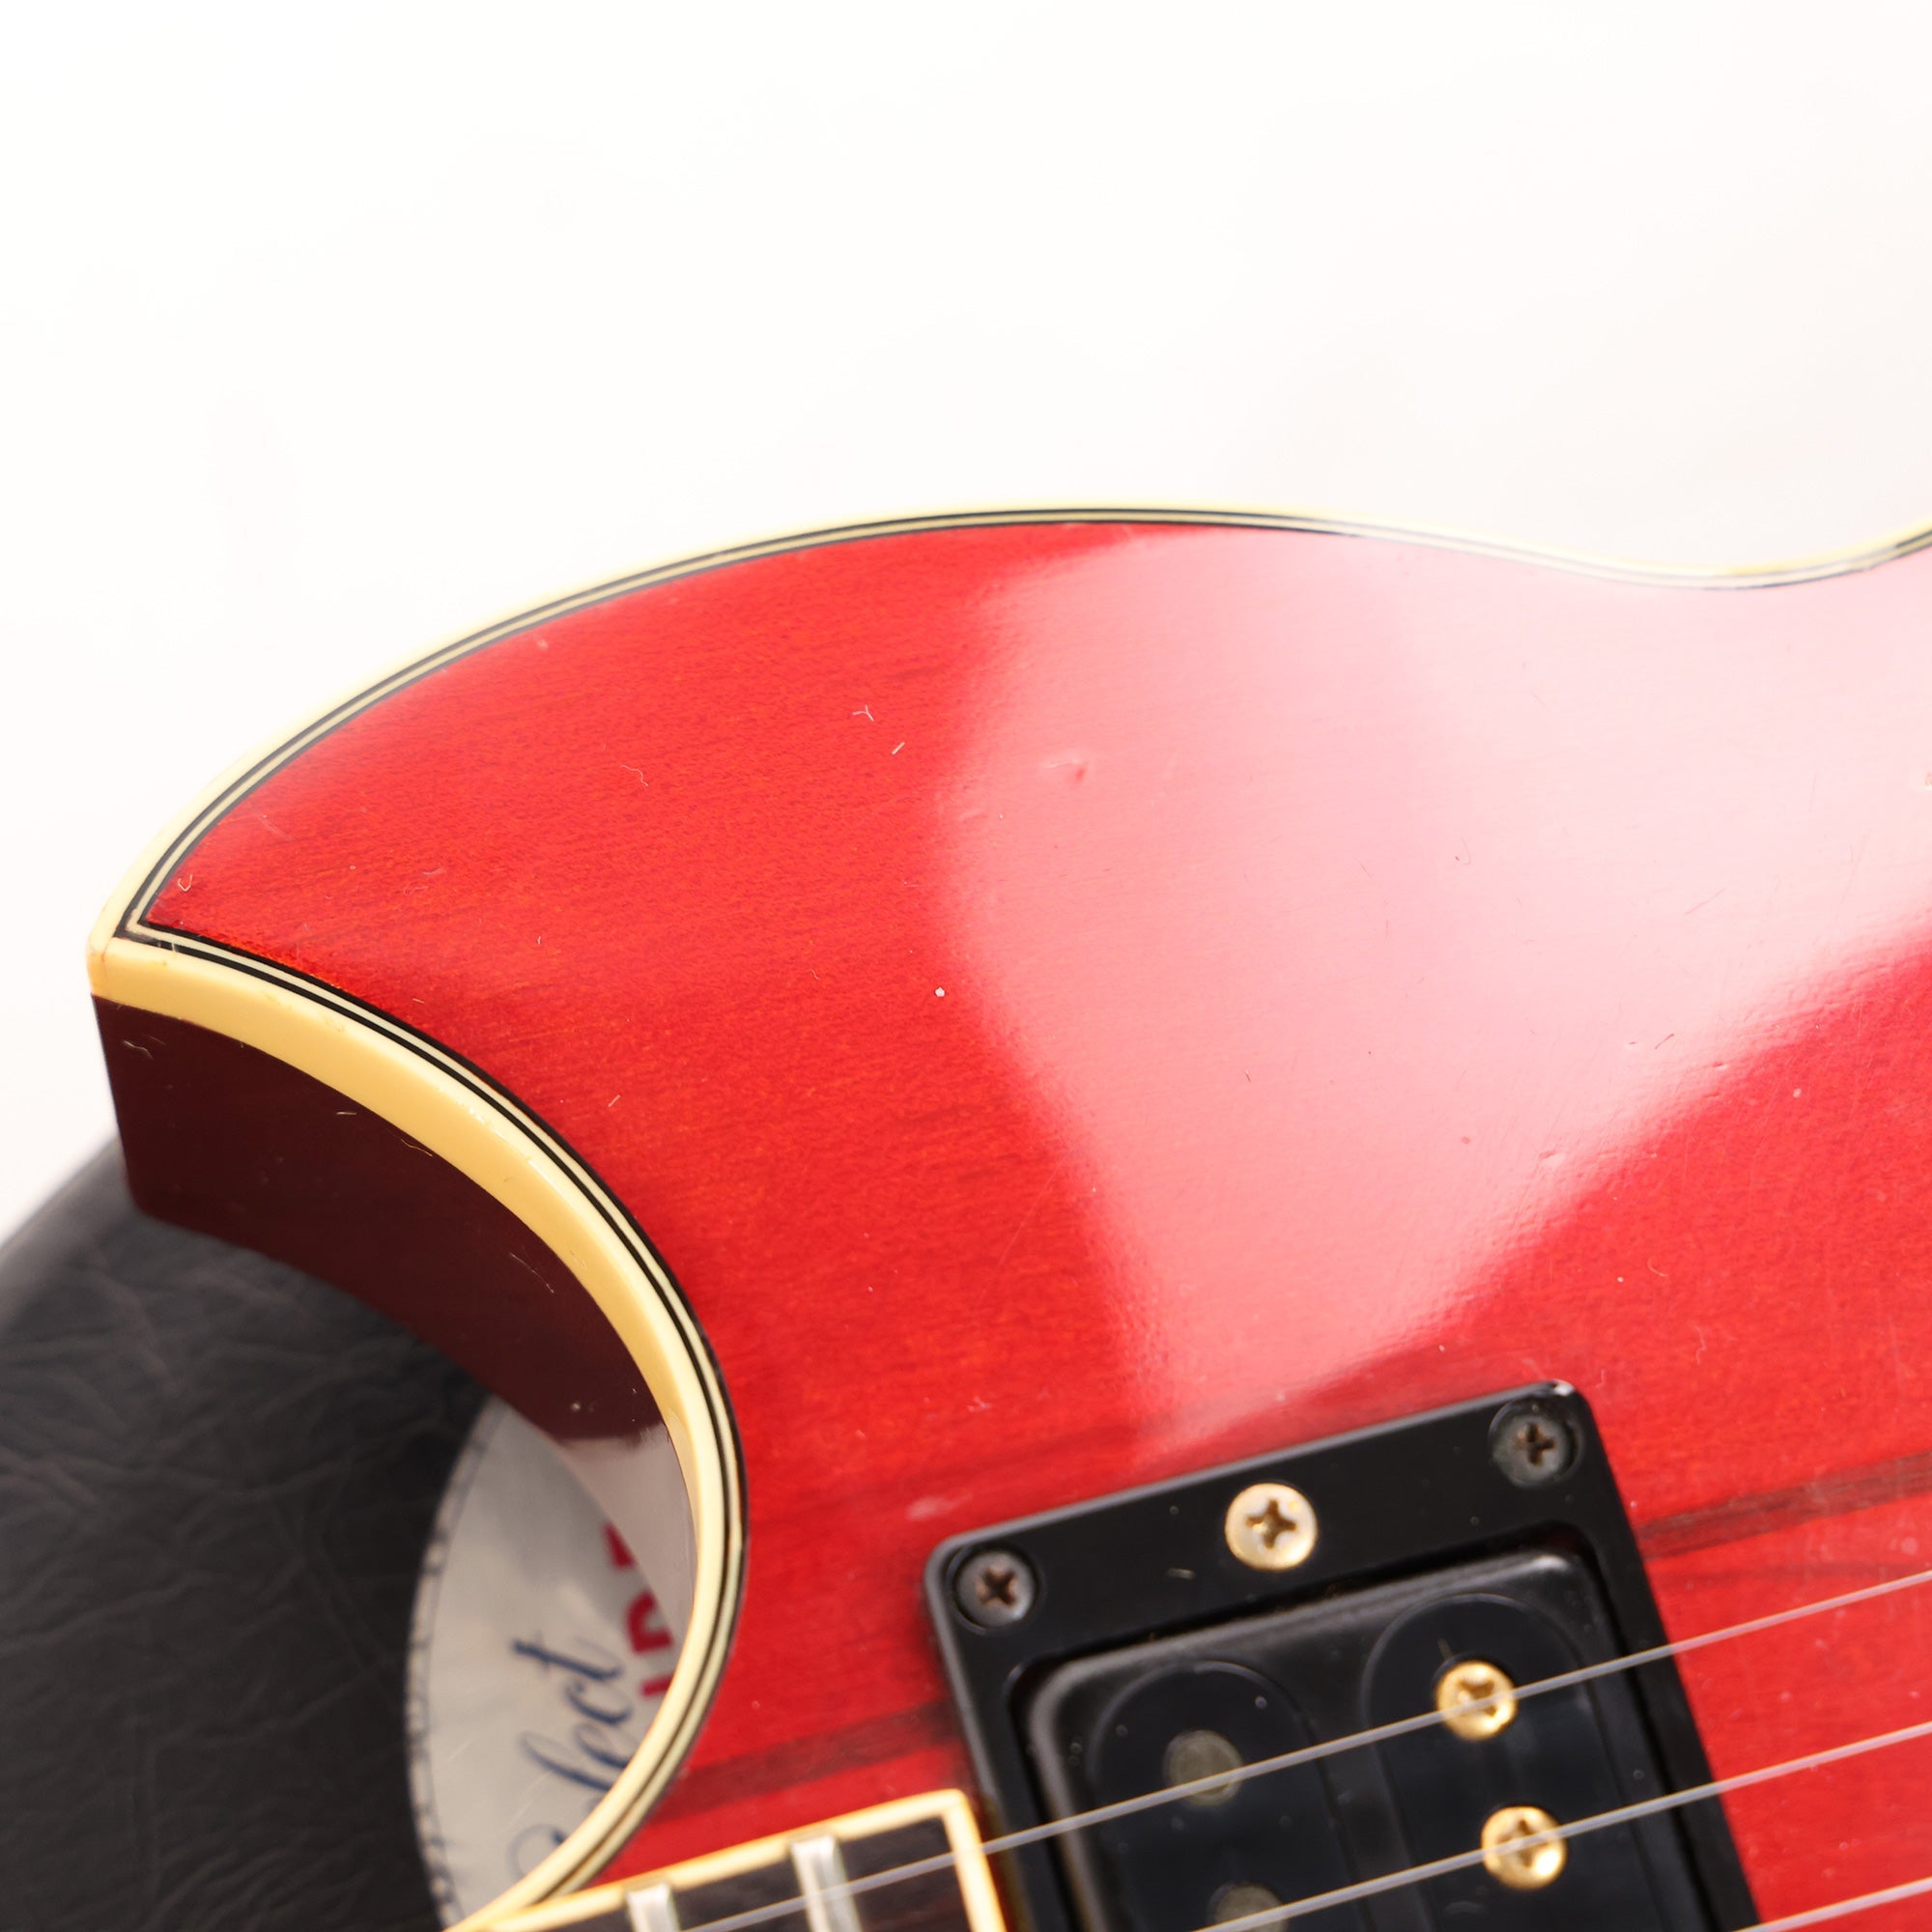 1982 Yamaha SG-1500 Persimmon Red | The Music Zoo